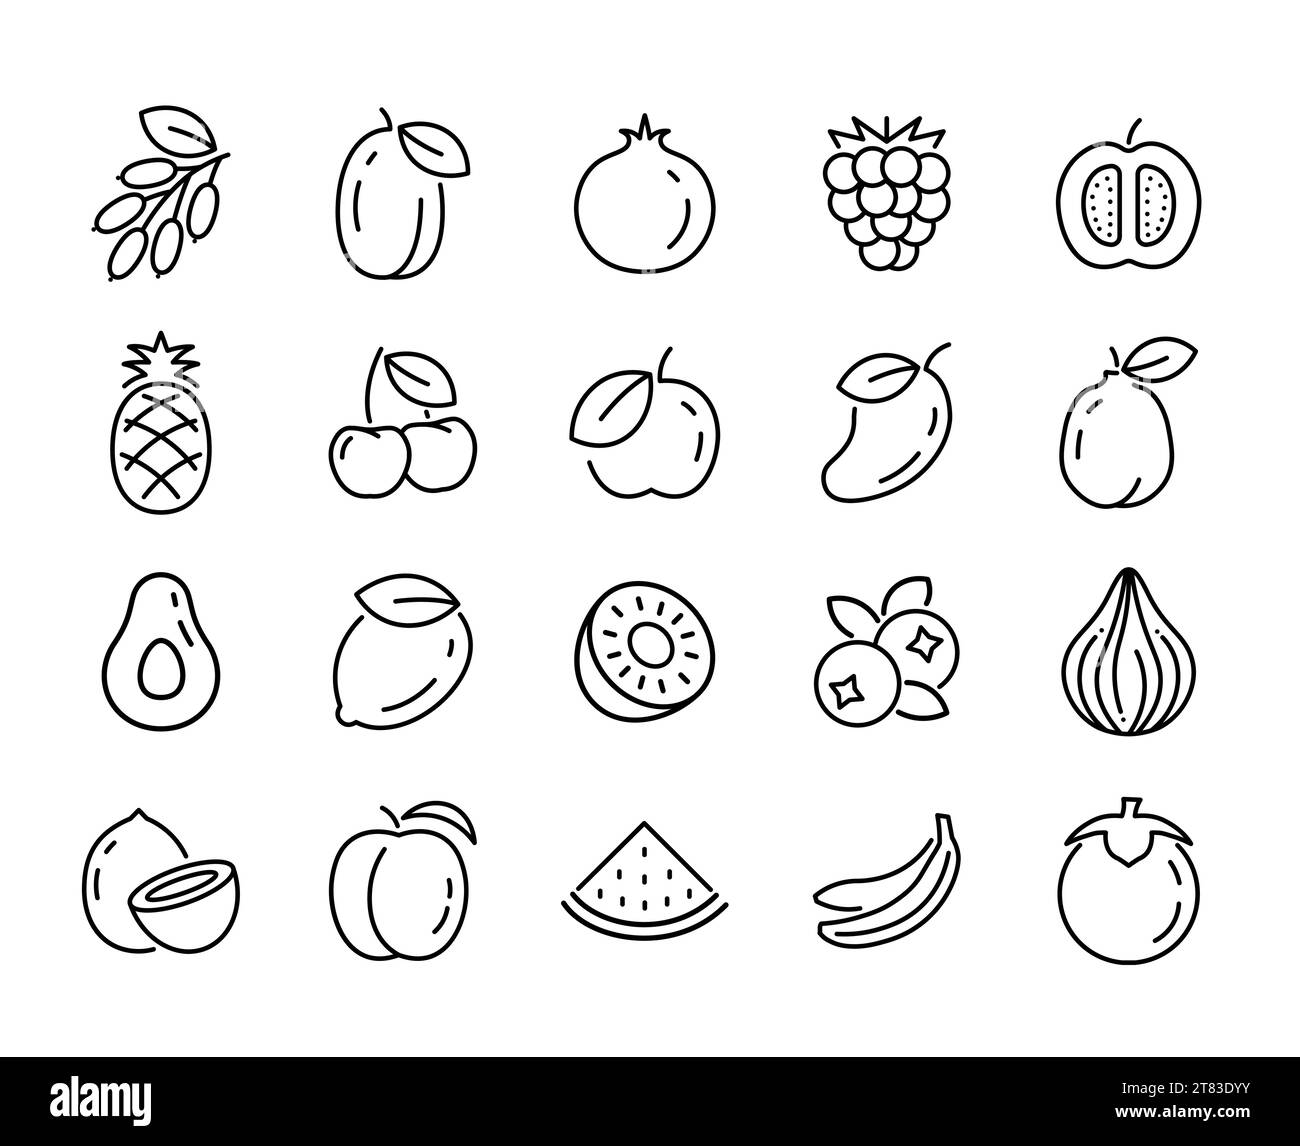 Fruit line icon isolated tropical food. Linear healthy outline apple grape cherry stroke sign vector illustration. Stock Vector